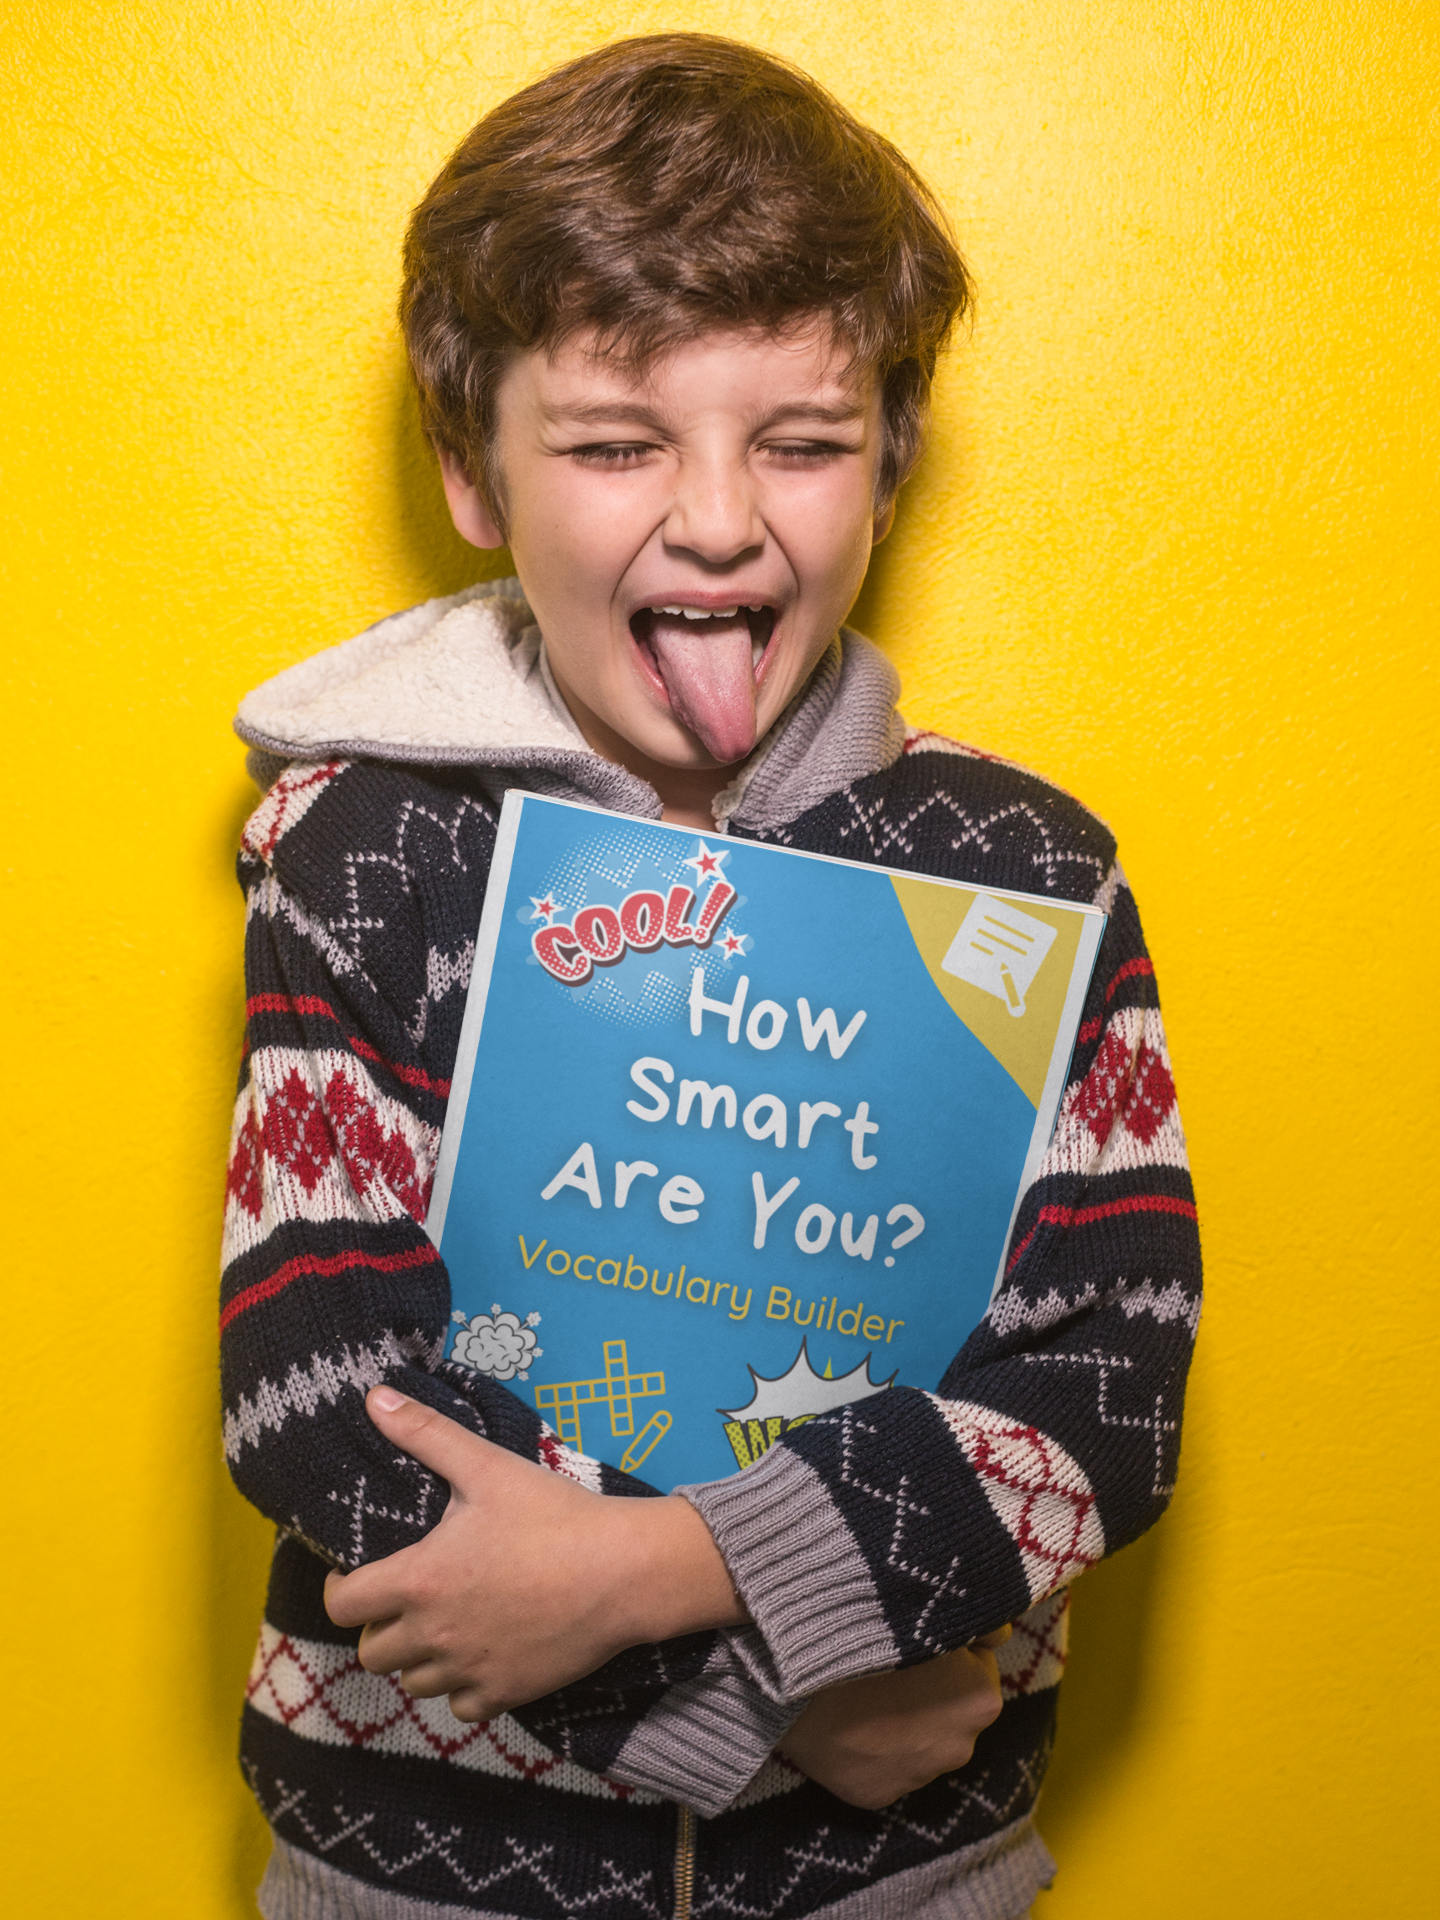 How Smart Are You? Vocabulary Builder Booklet